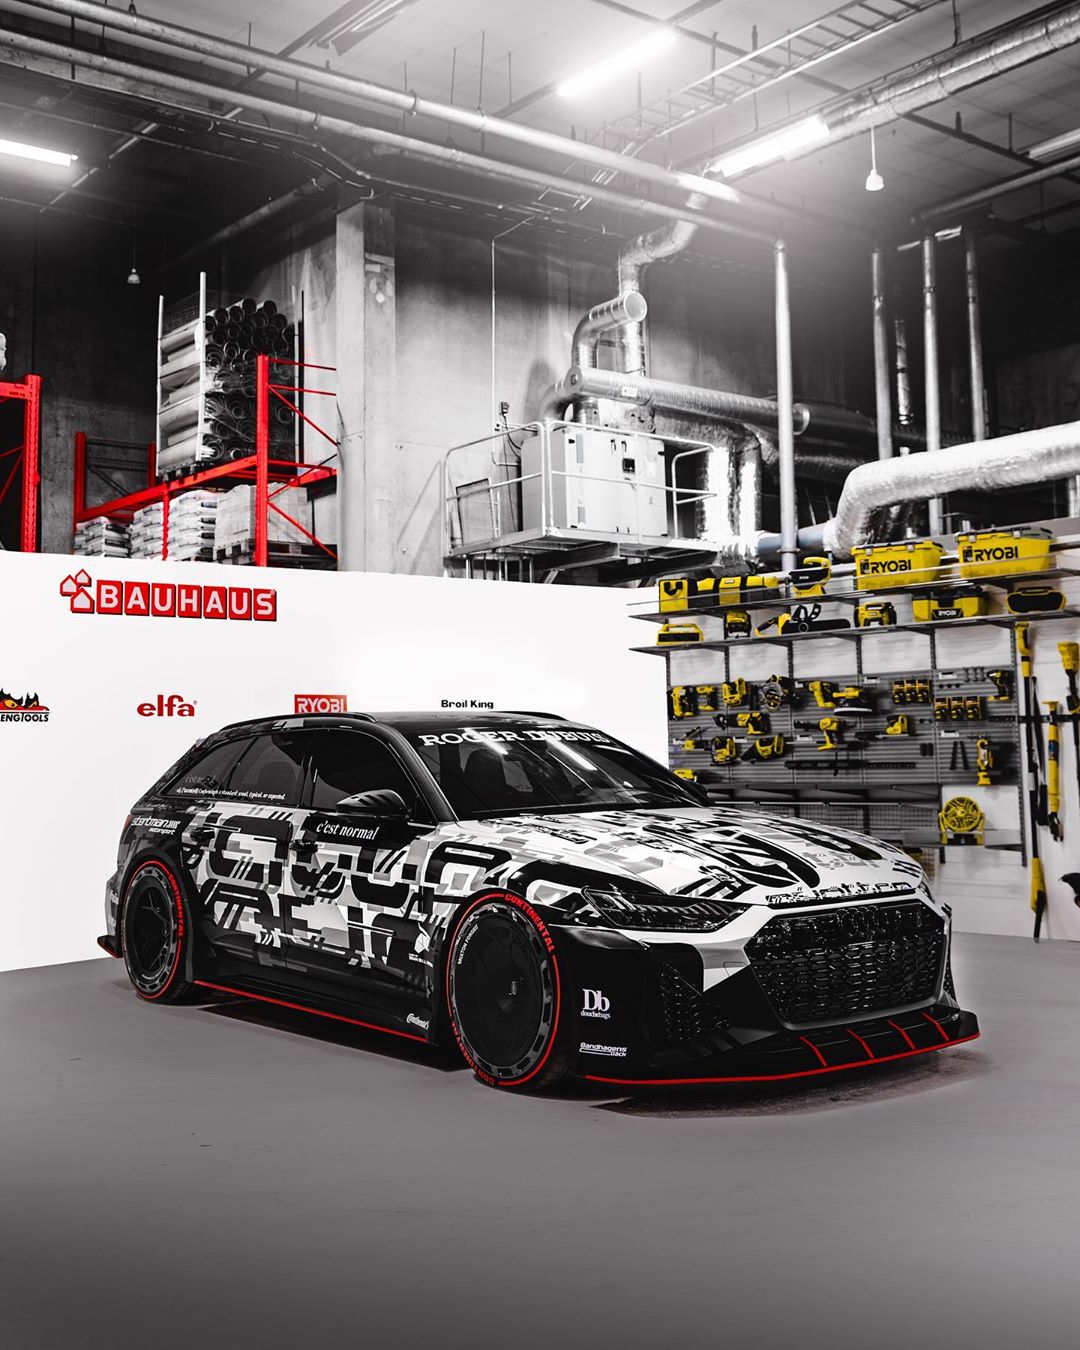 jon-olsson-s-1000-hp-2020-audi-rs6-is-the-meanest-in-the-game_4.jpg